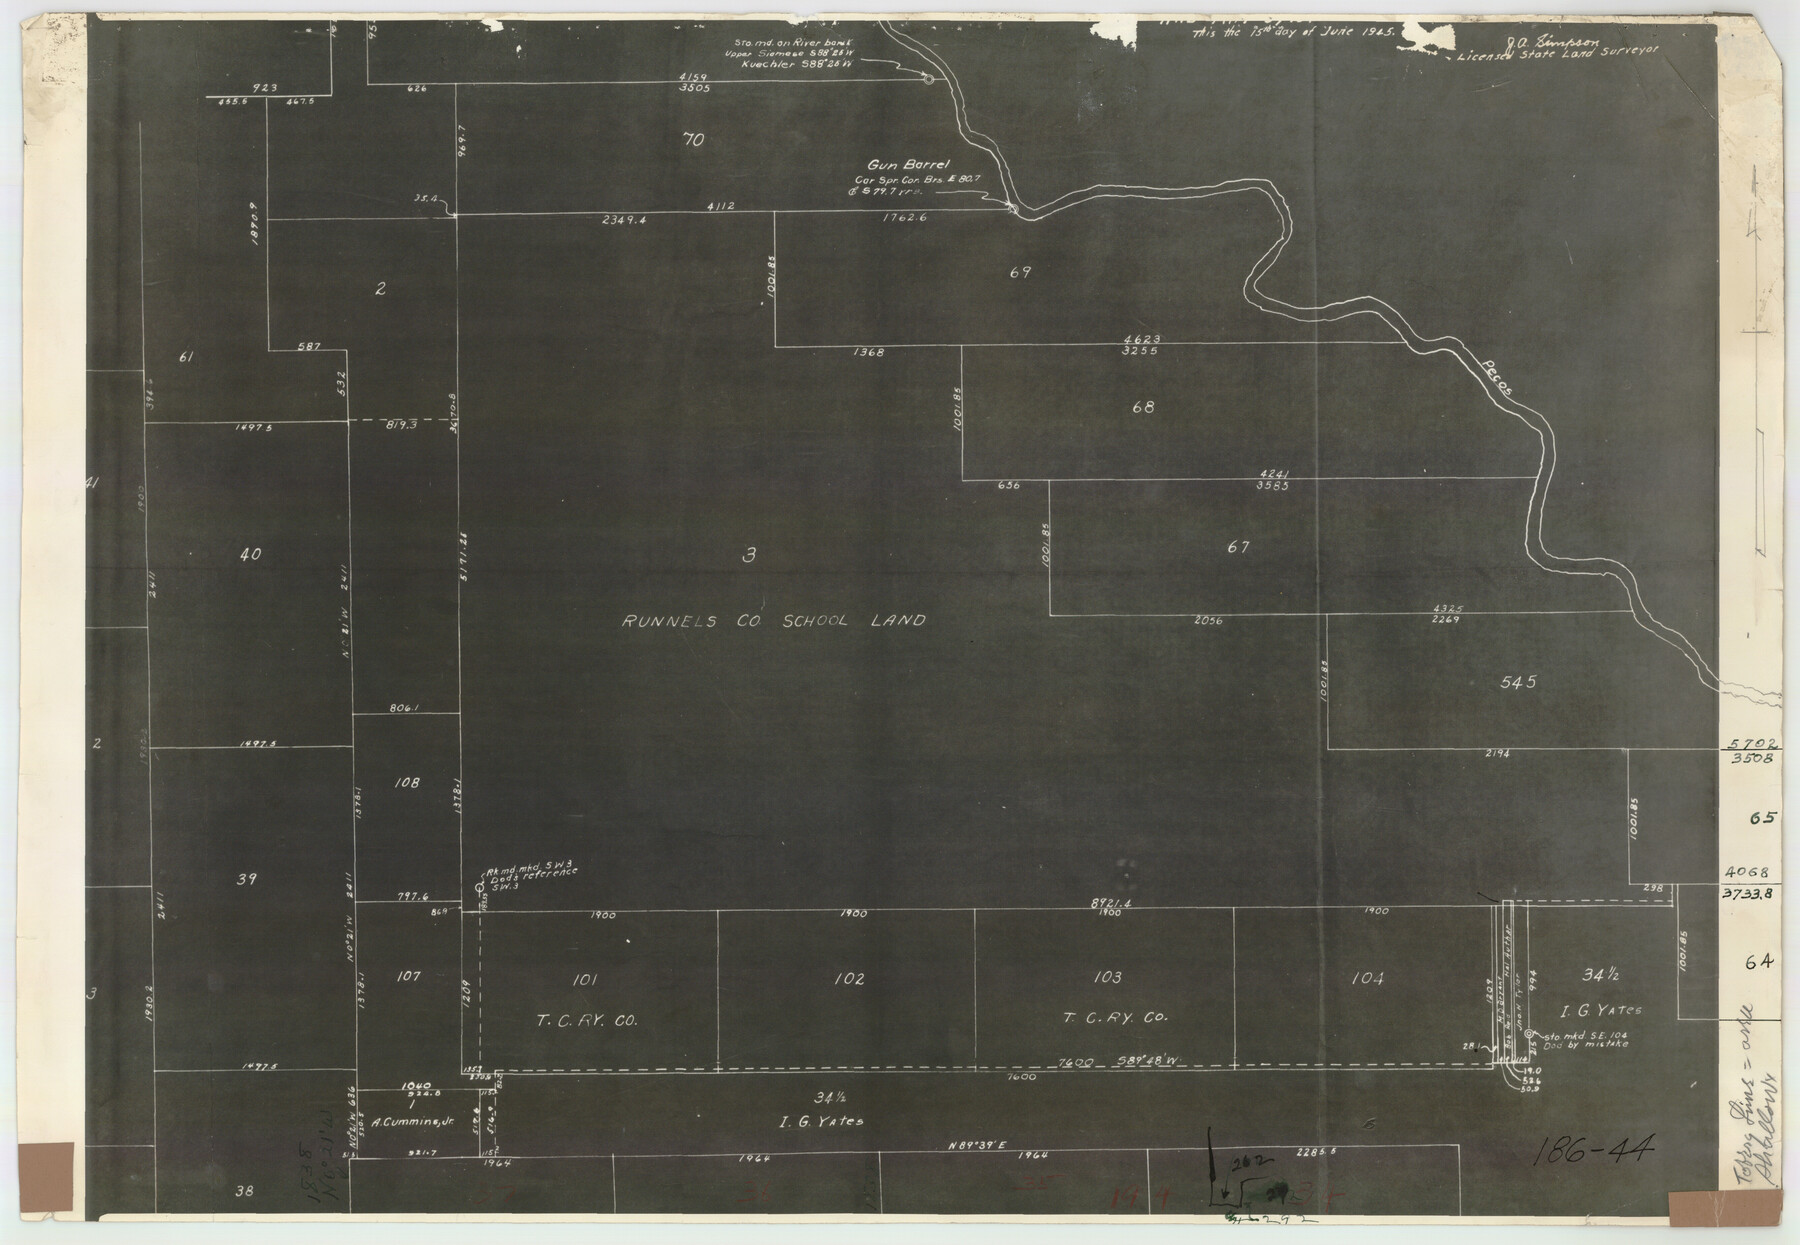 91686, [Runnels County School Land and vicinity], Twichell Survey Records